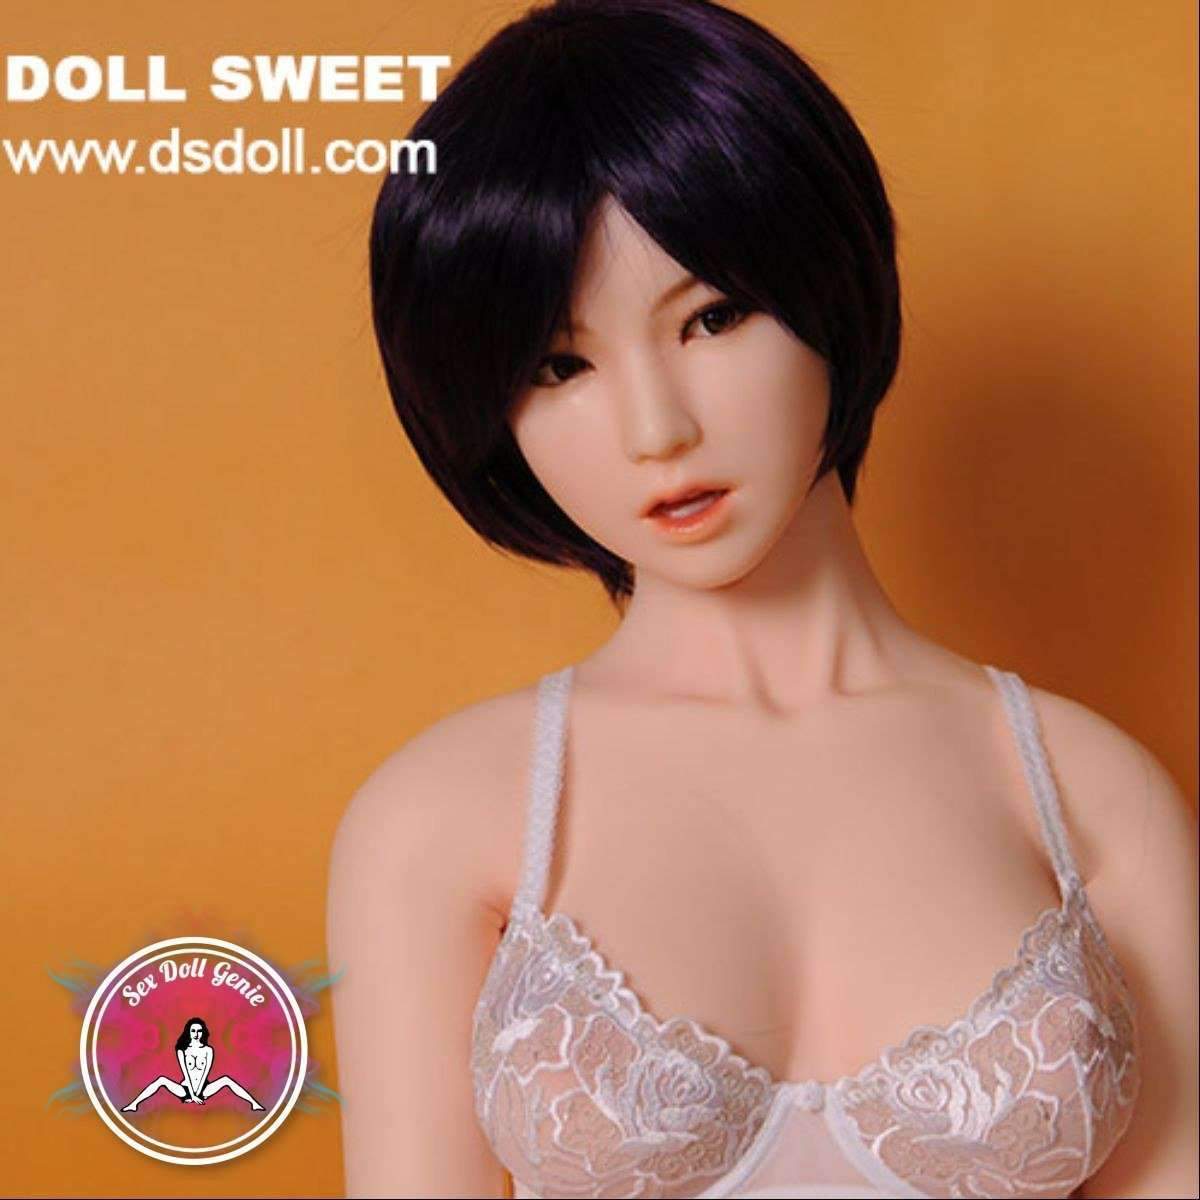 DS Doll - 158Plus - Thera Head - Type 1 D Cup Silicone Doll-16